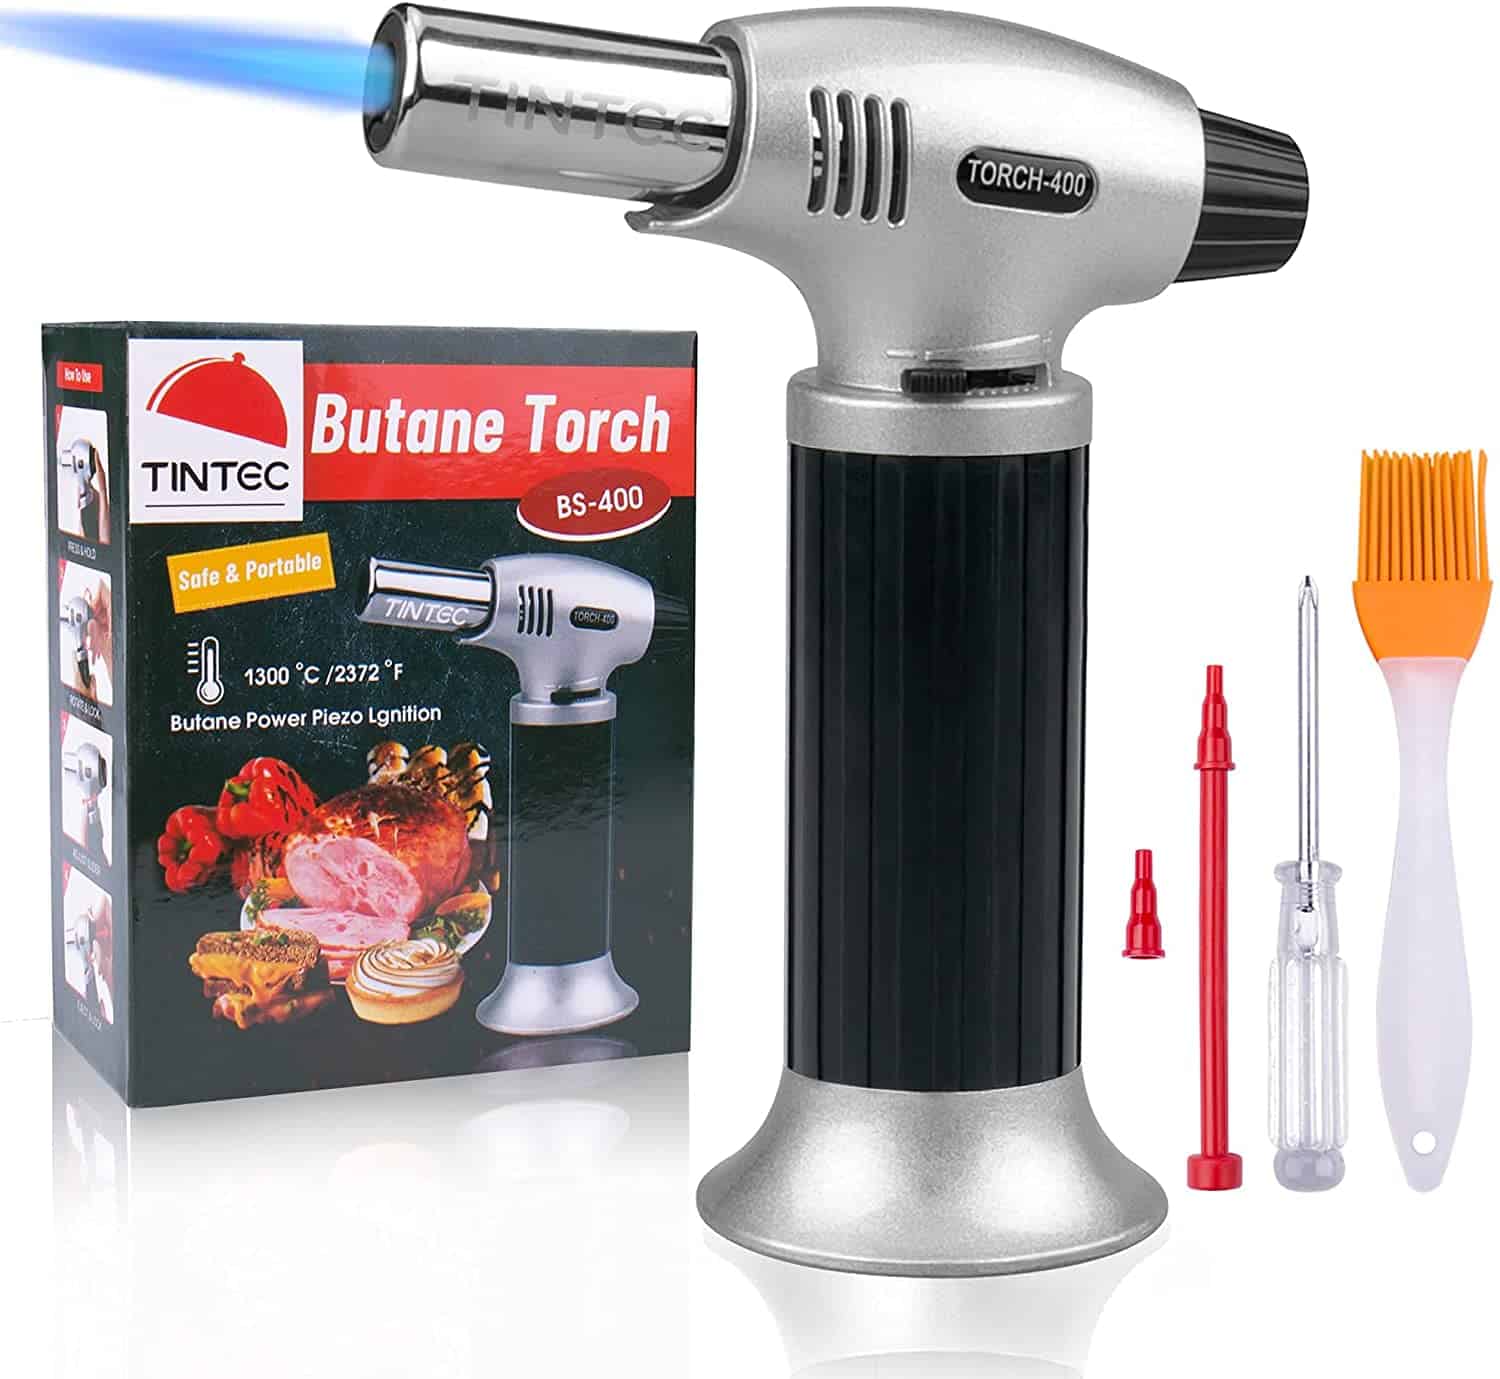 Tintec Chef Cooking Torch Lighter